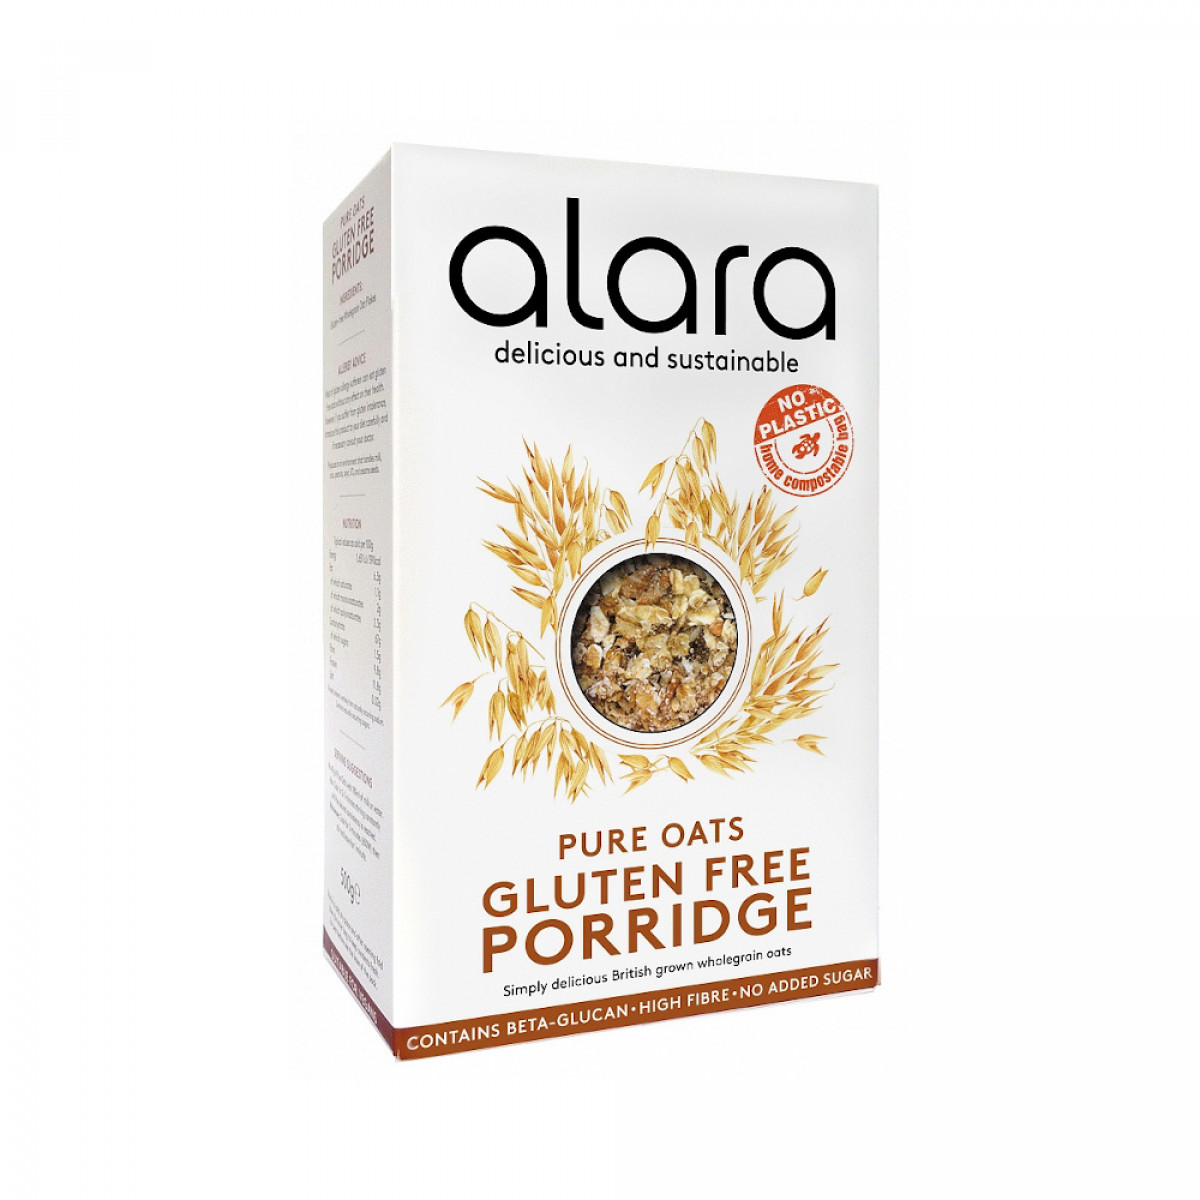 Product picture for Pure Oats